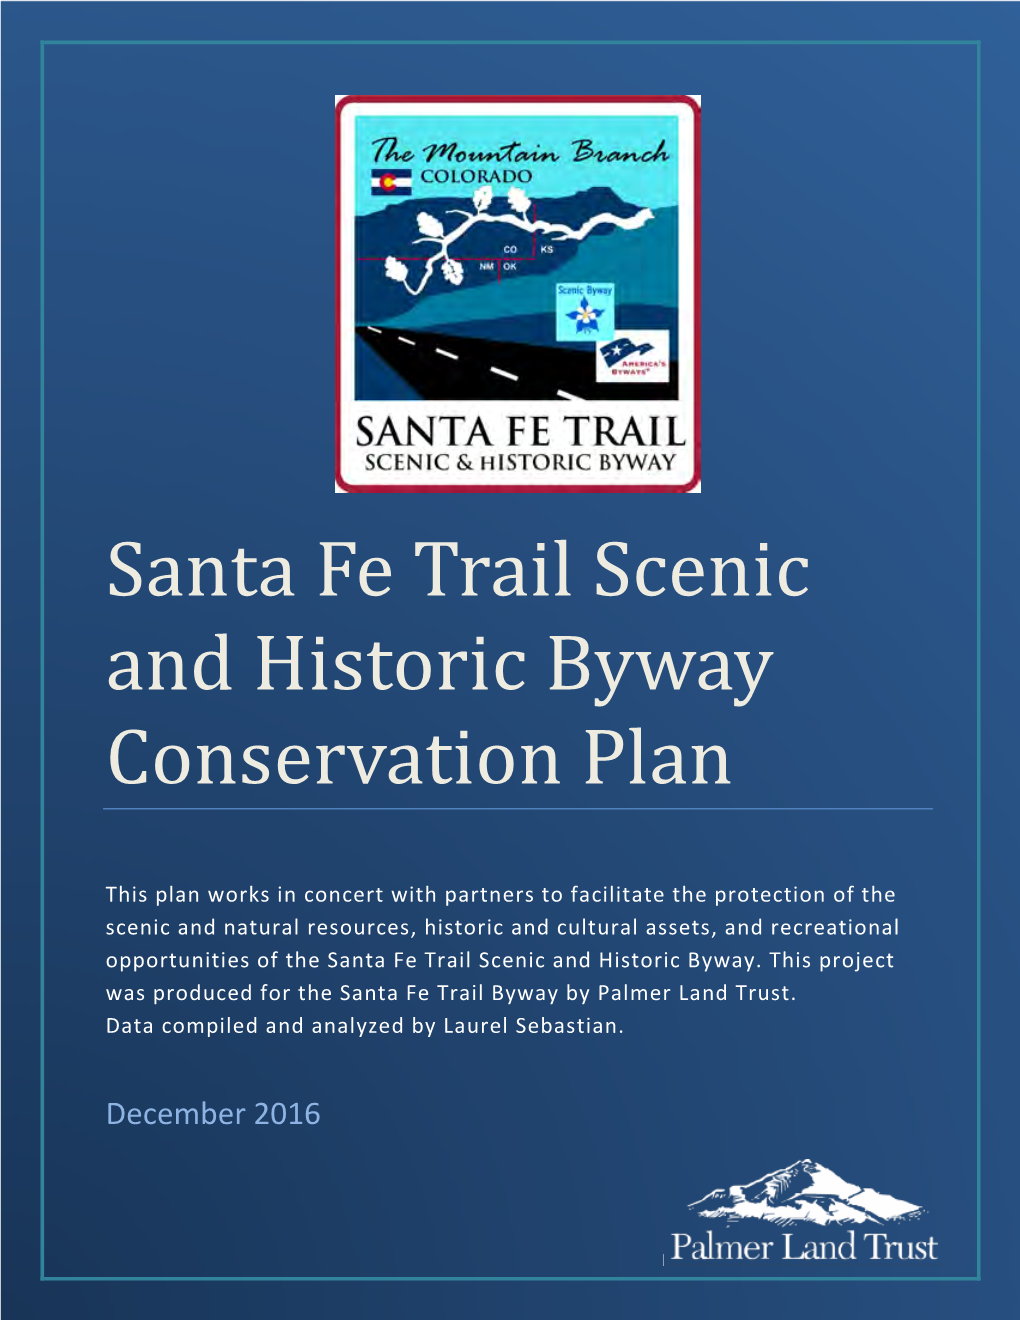 Santa Fe Trail Scenic and Historic Byway Conservation Plan Is the Result of Collaborative Work Between Many Individuals and Organizations